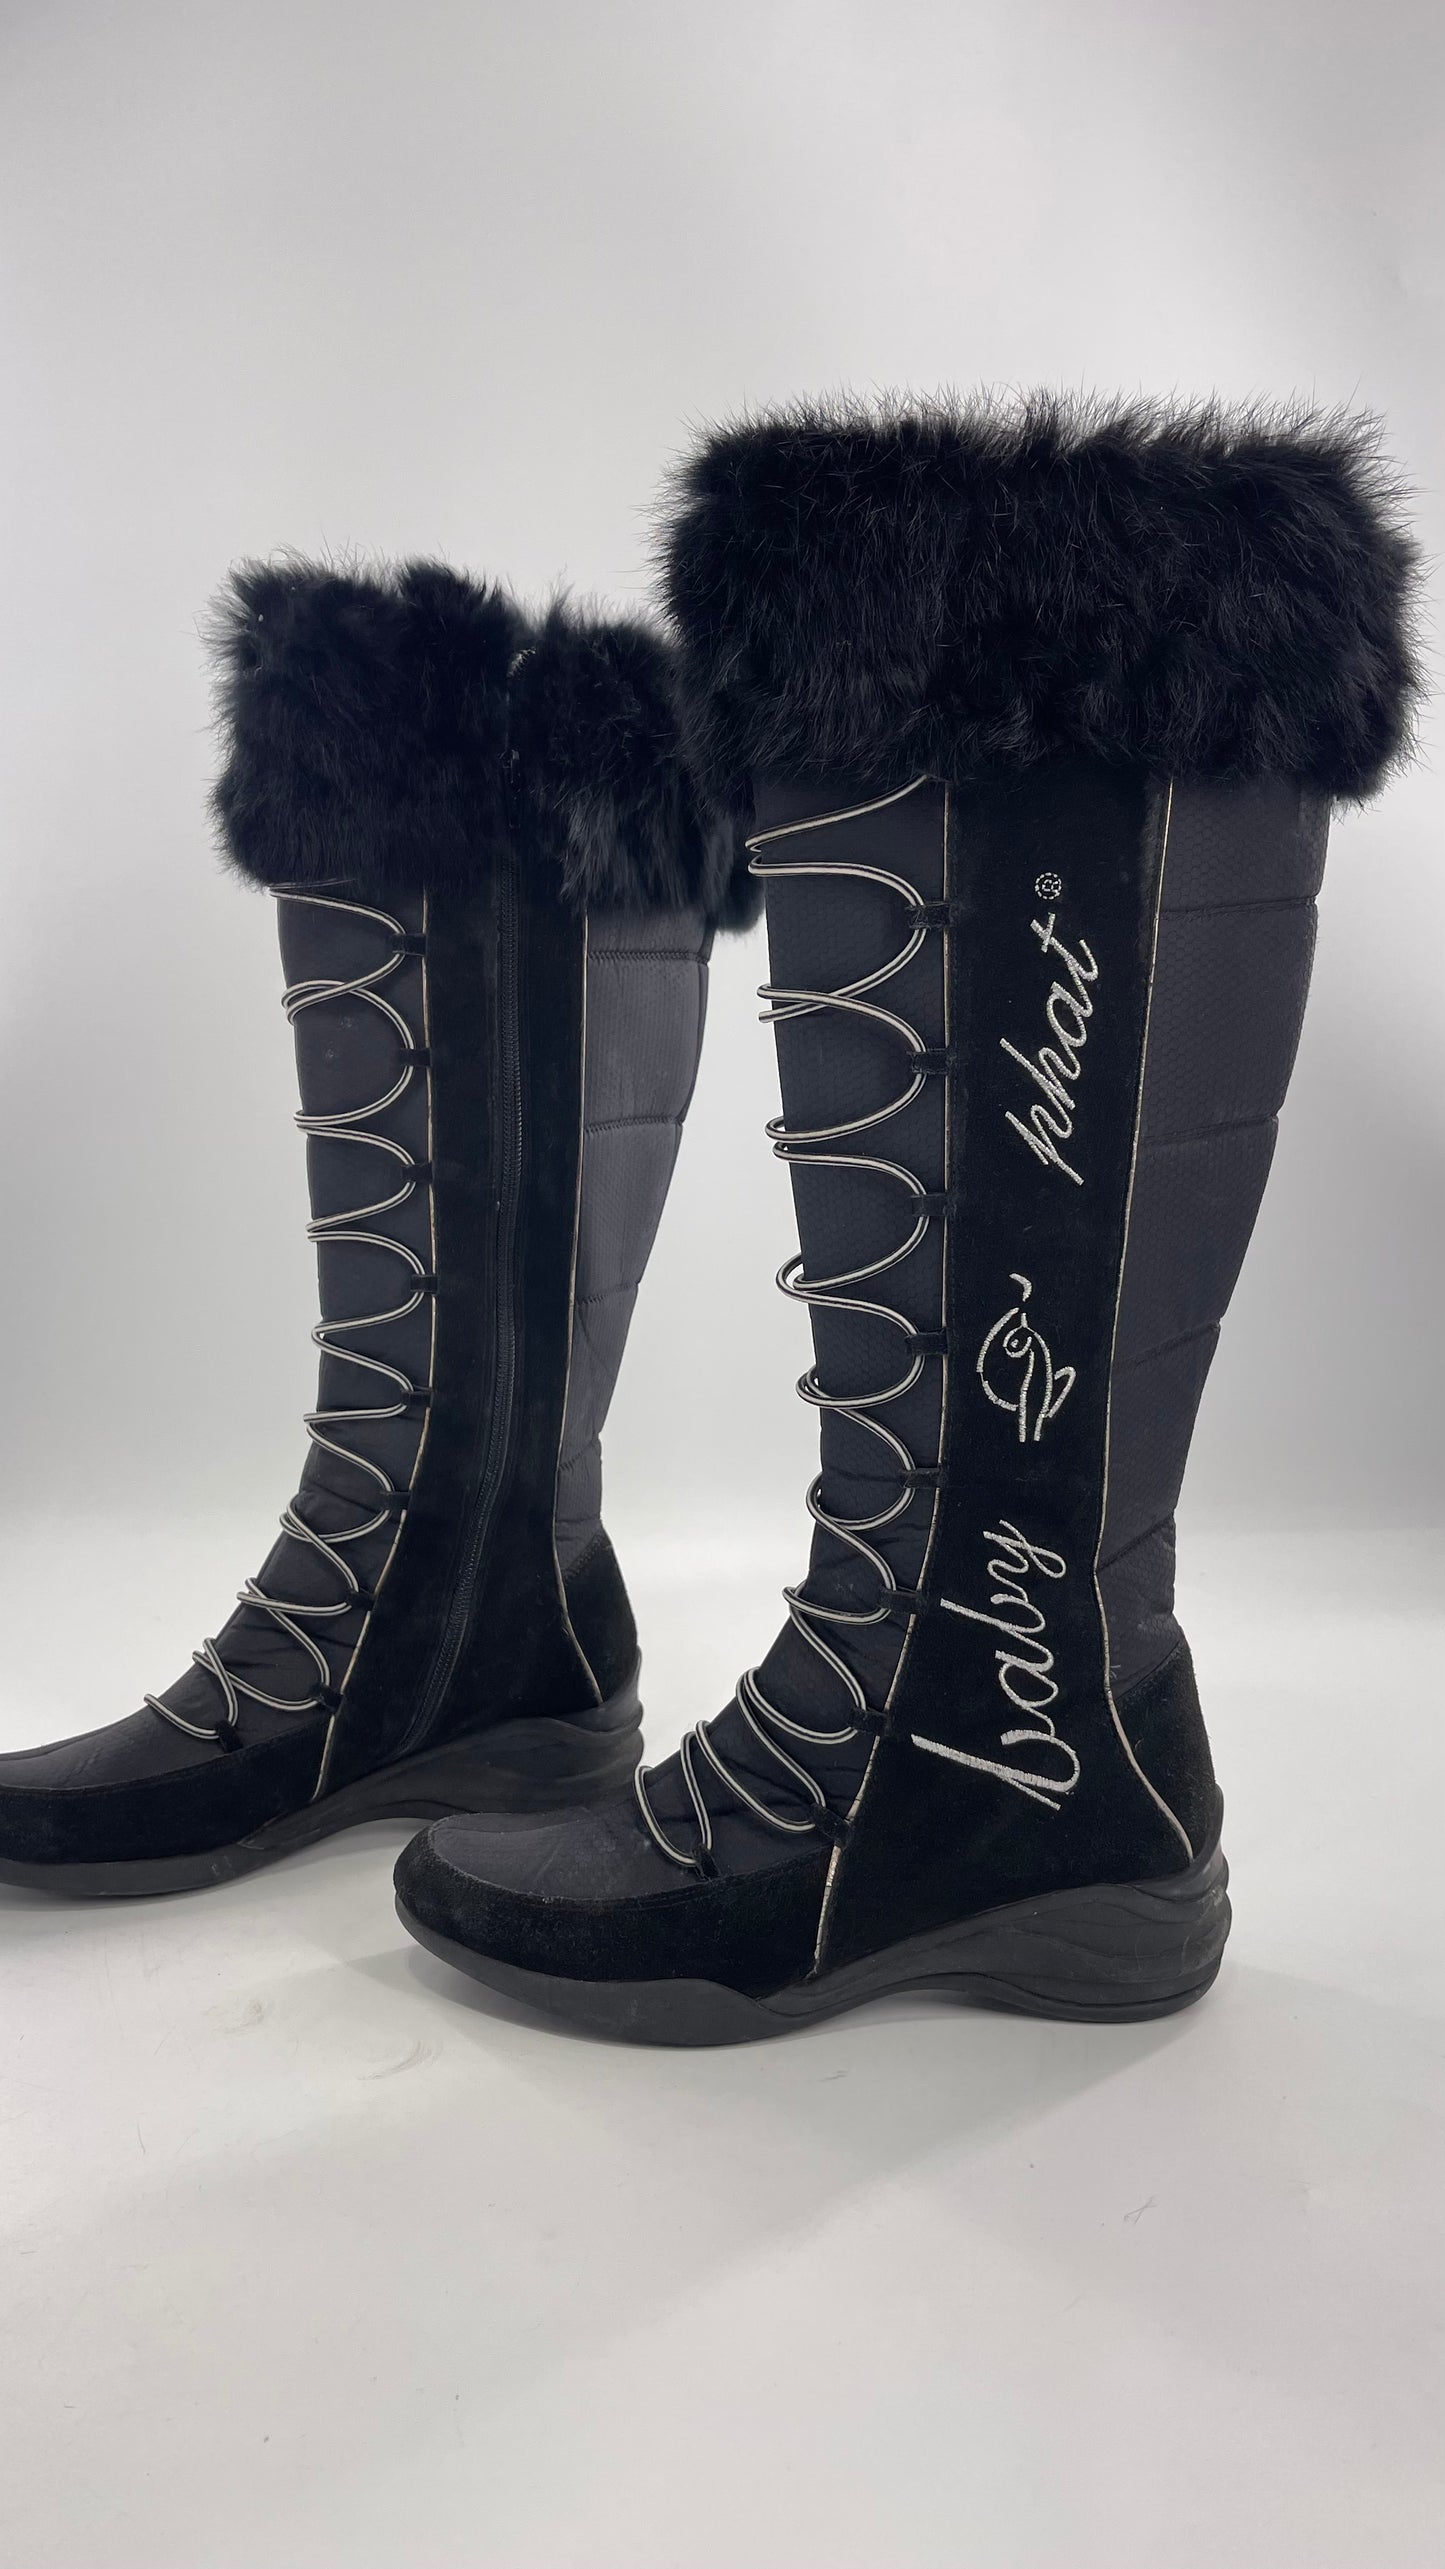 Baby Phat Black Knee High Boots with Rabbit Fur Trim, Bungee Cord Ties, and Embroidered Logo Design